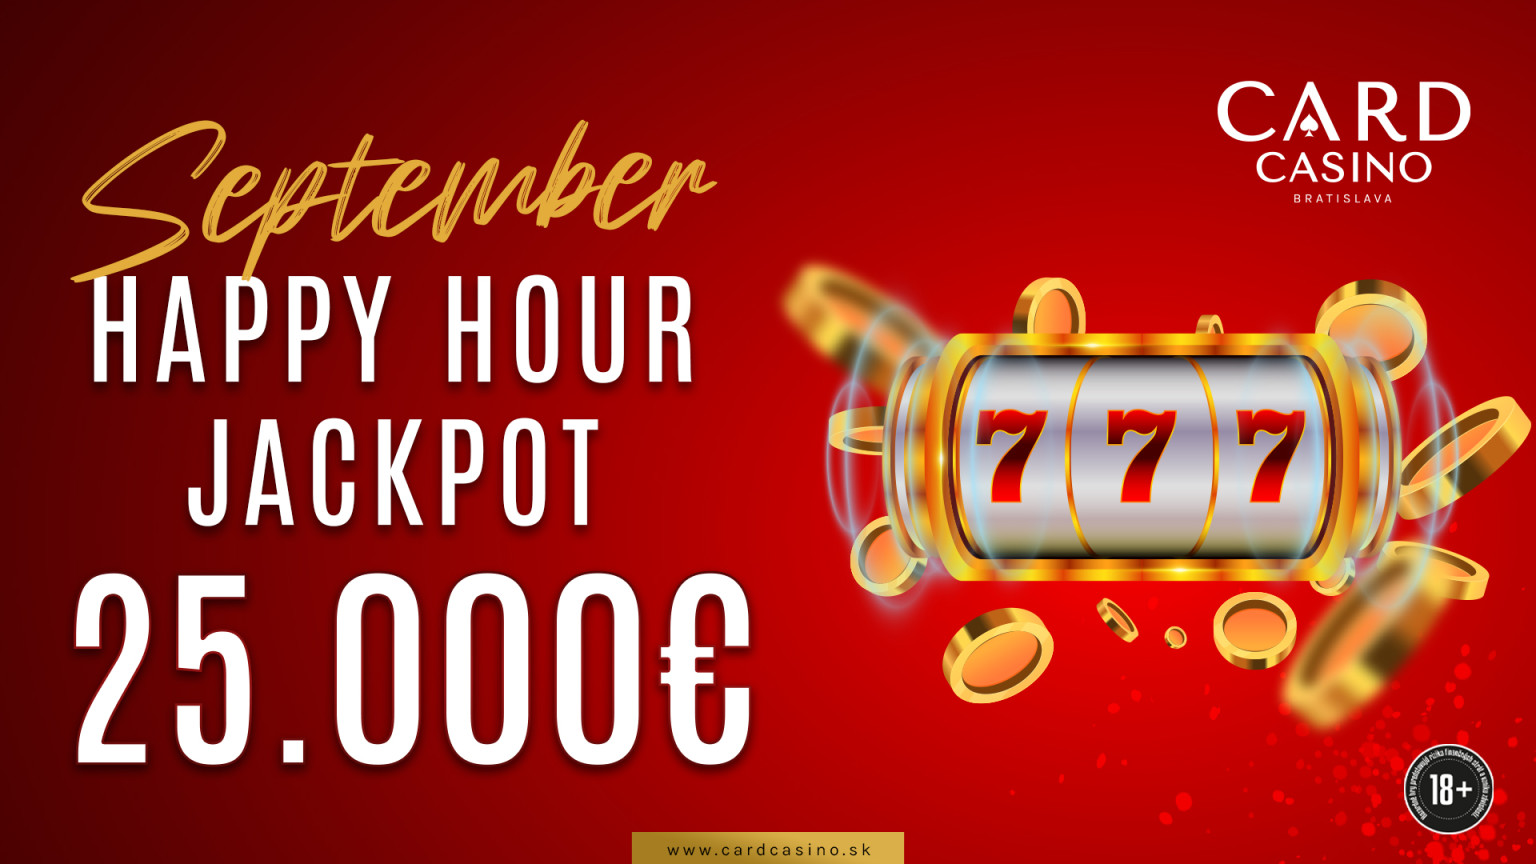 September full of money! Dial it up with the Happy Hour Jackpot